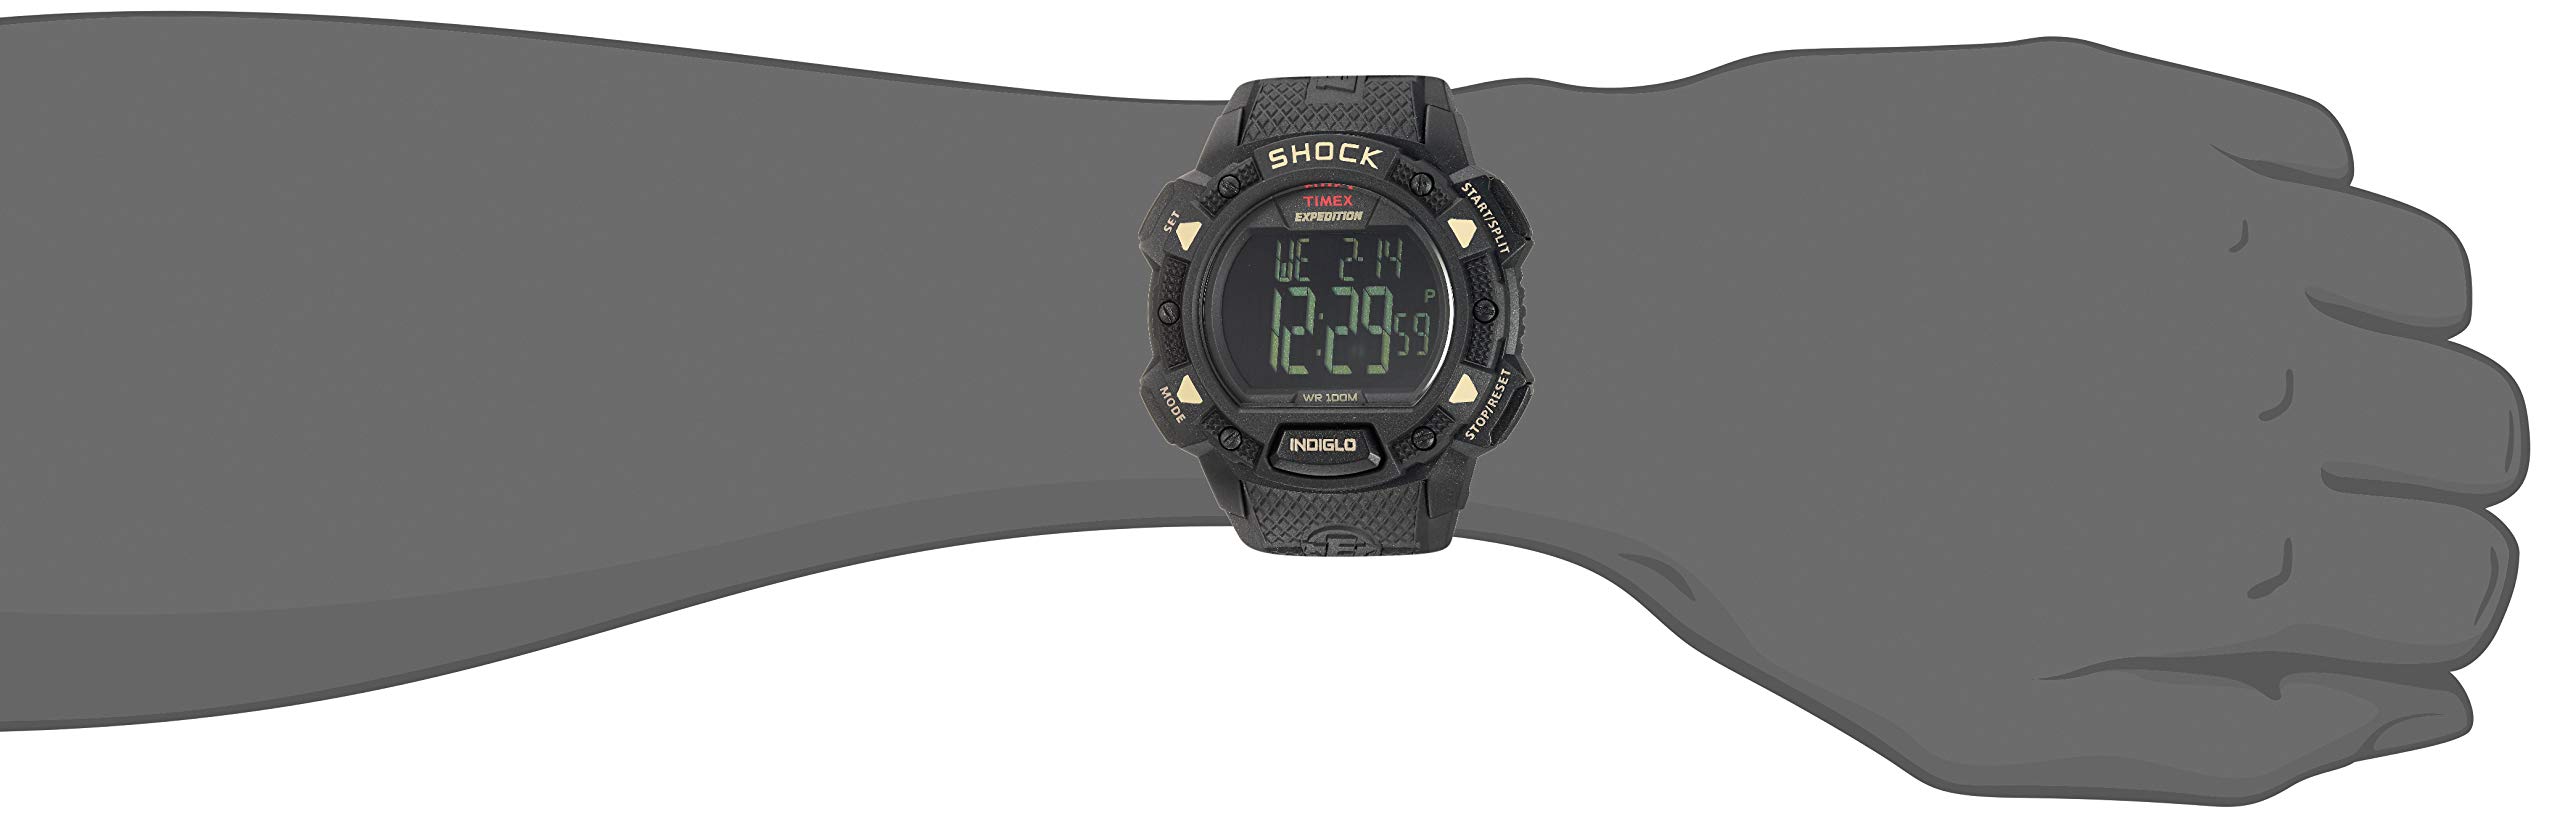 Timex Men's Expedition Digital Shock CAT Resin Strap Watch